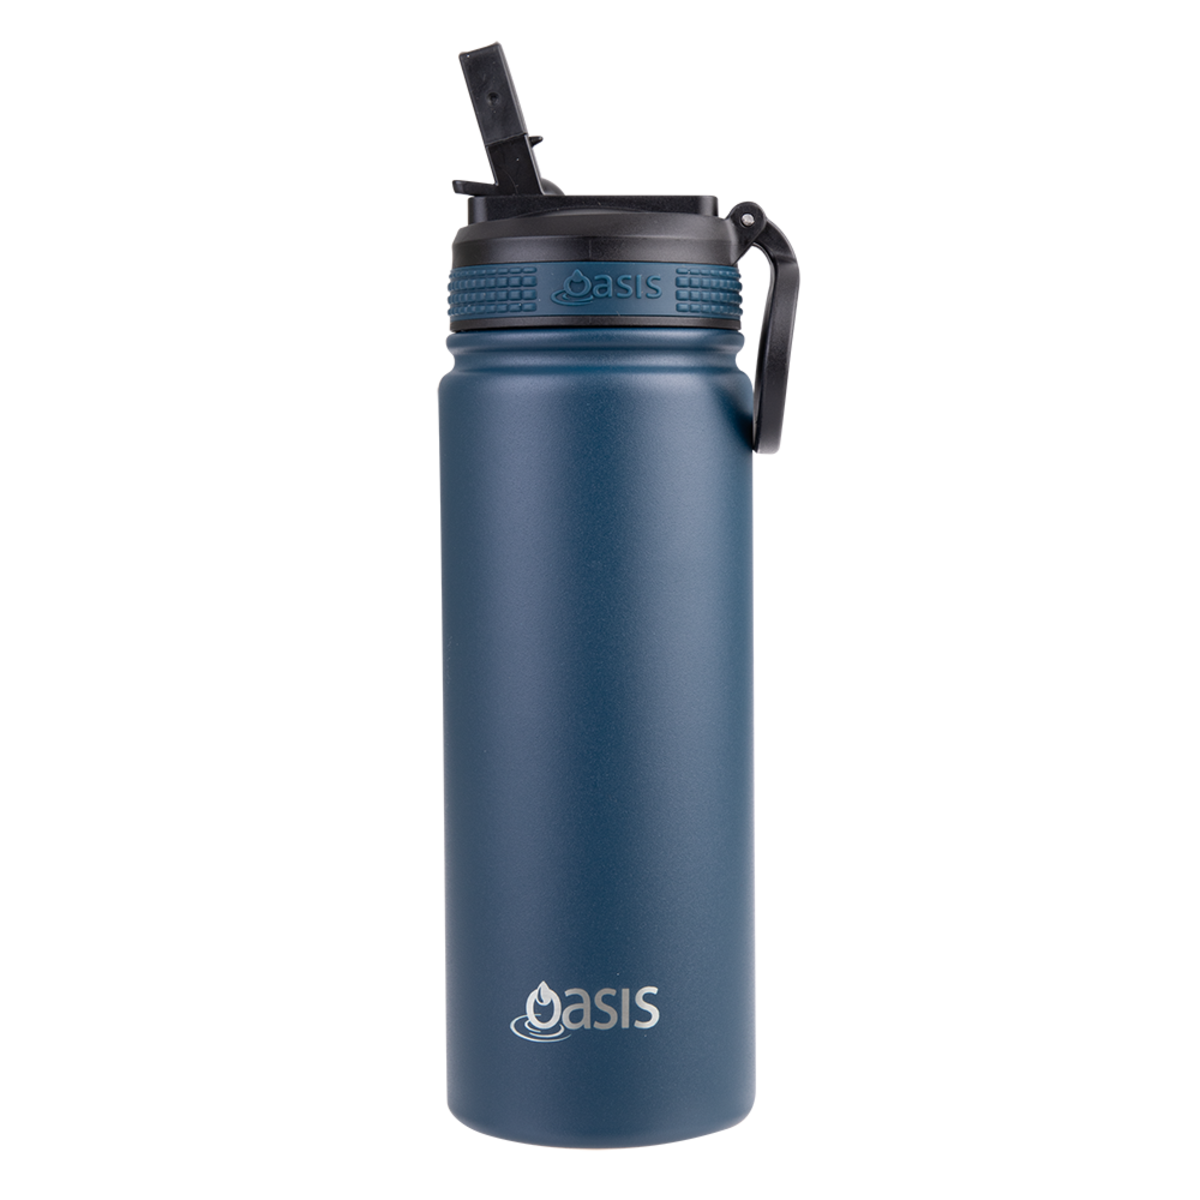 OASIS STAINLESS STEEL DOUBLE WALL INSULATED "CHALLENGER" SPORTS BOTTLE W/ SIPPER STRAW 550ML -Navy